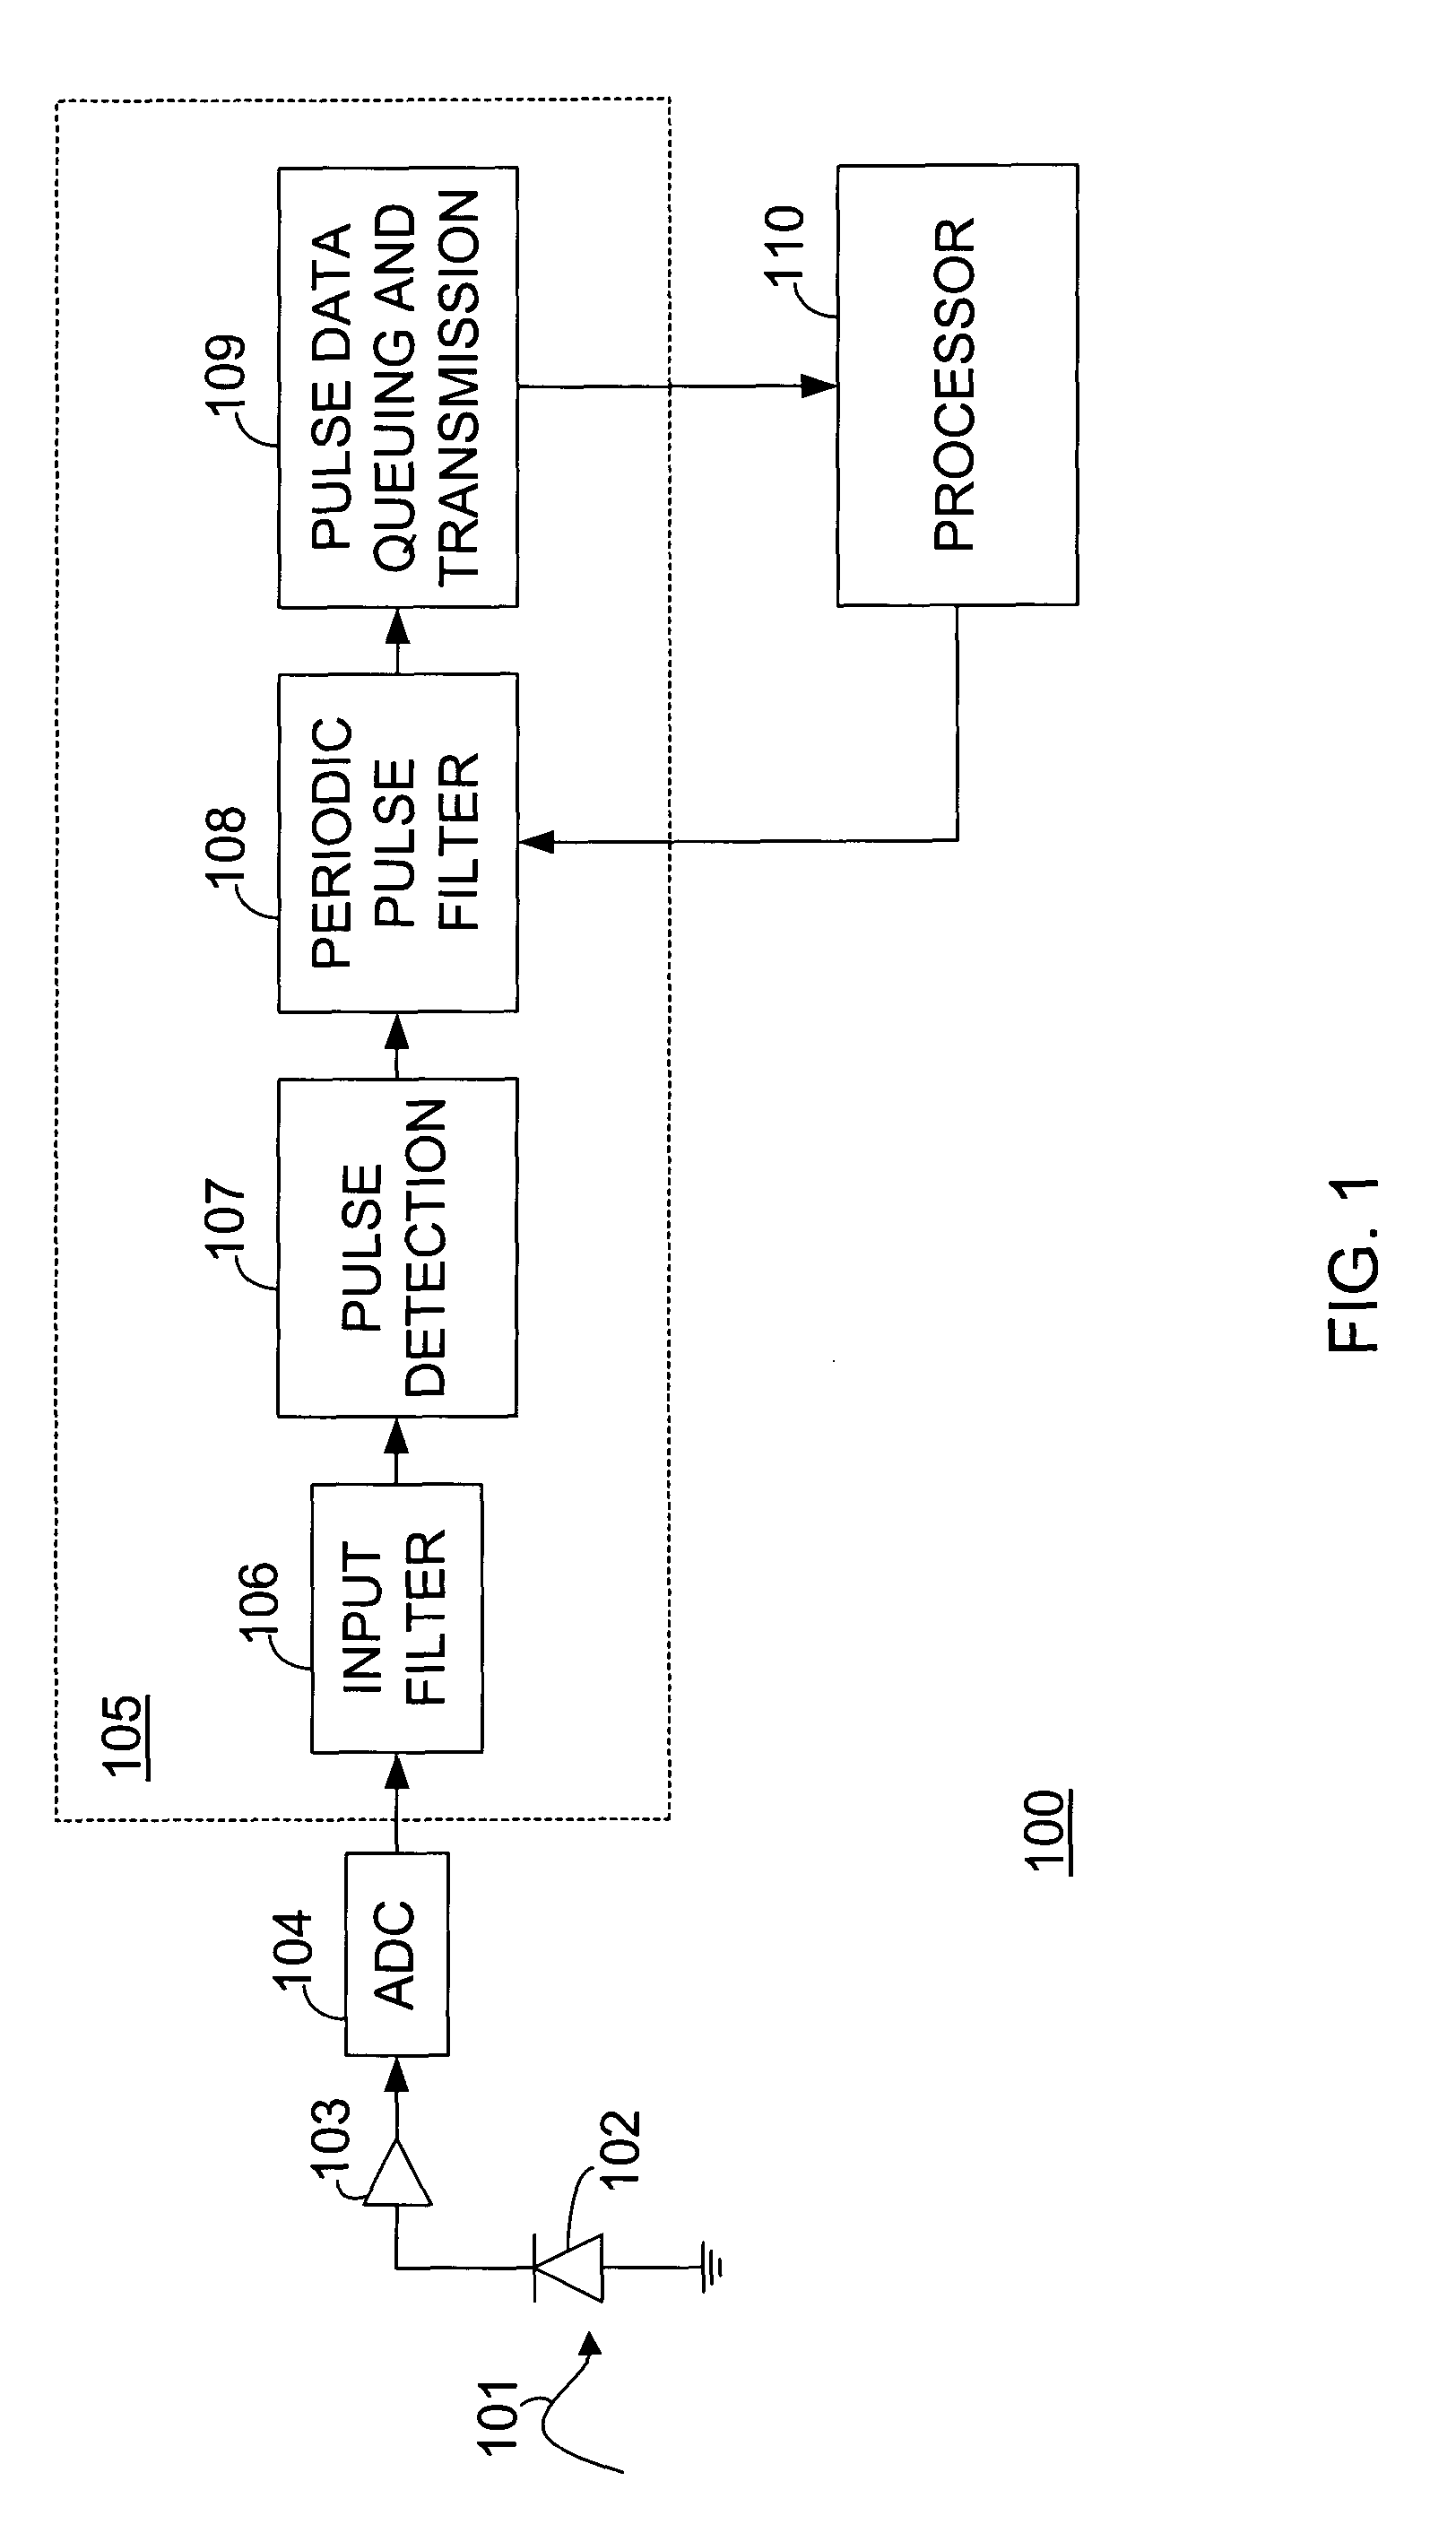 Methods and apparatuses for filtering pulses